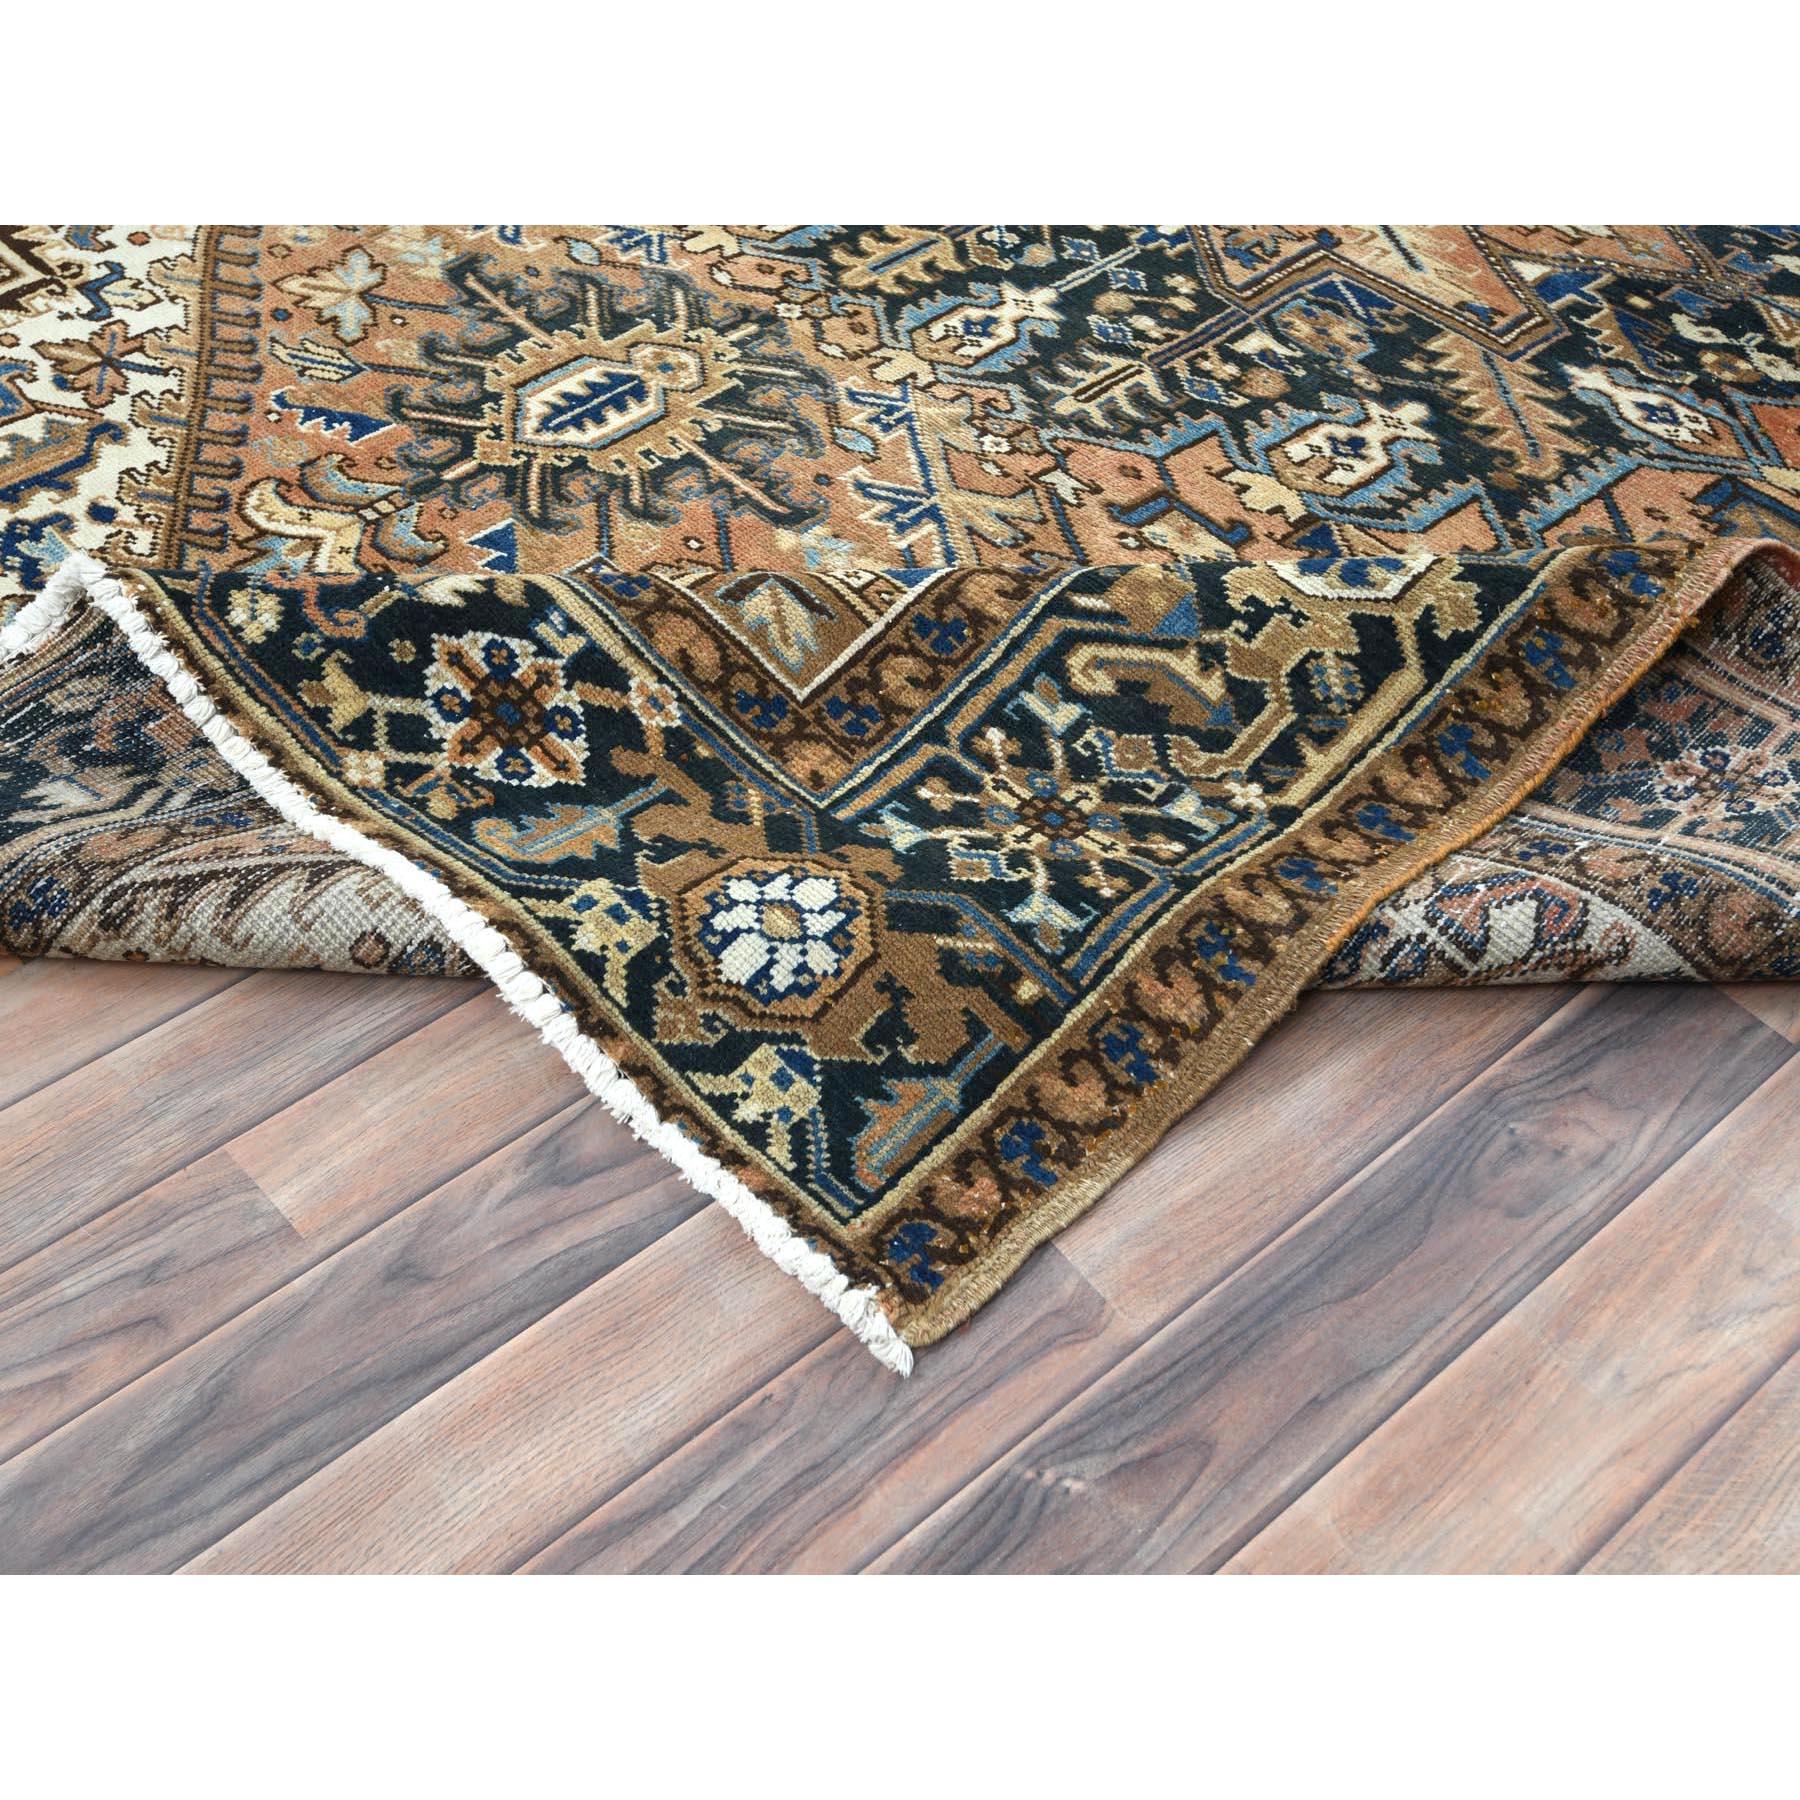 Camel Color Worn Wool Hand Knotted Vintage Persian Heriz Distressed Look Rug 1